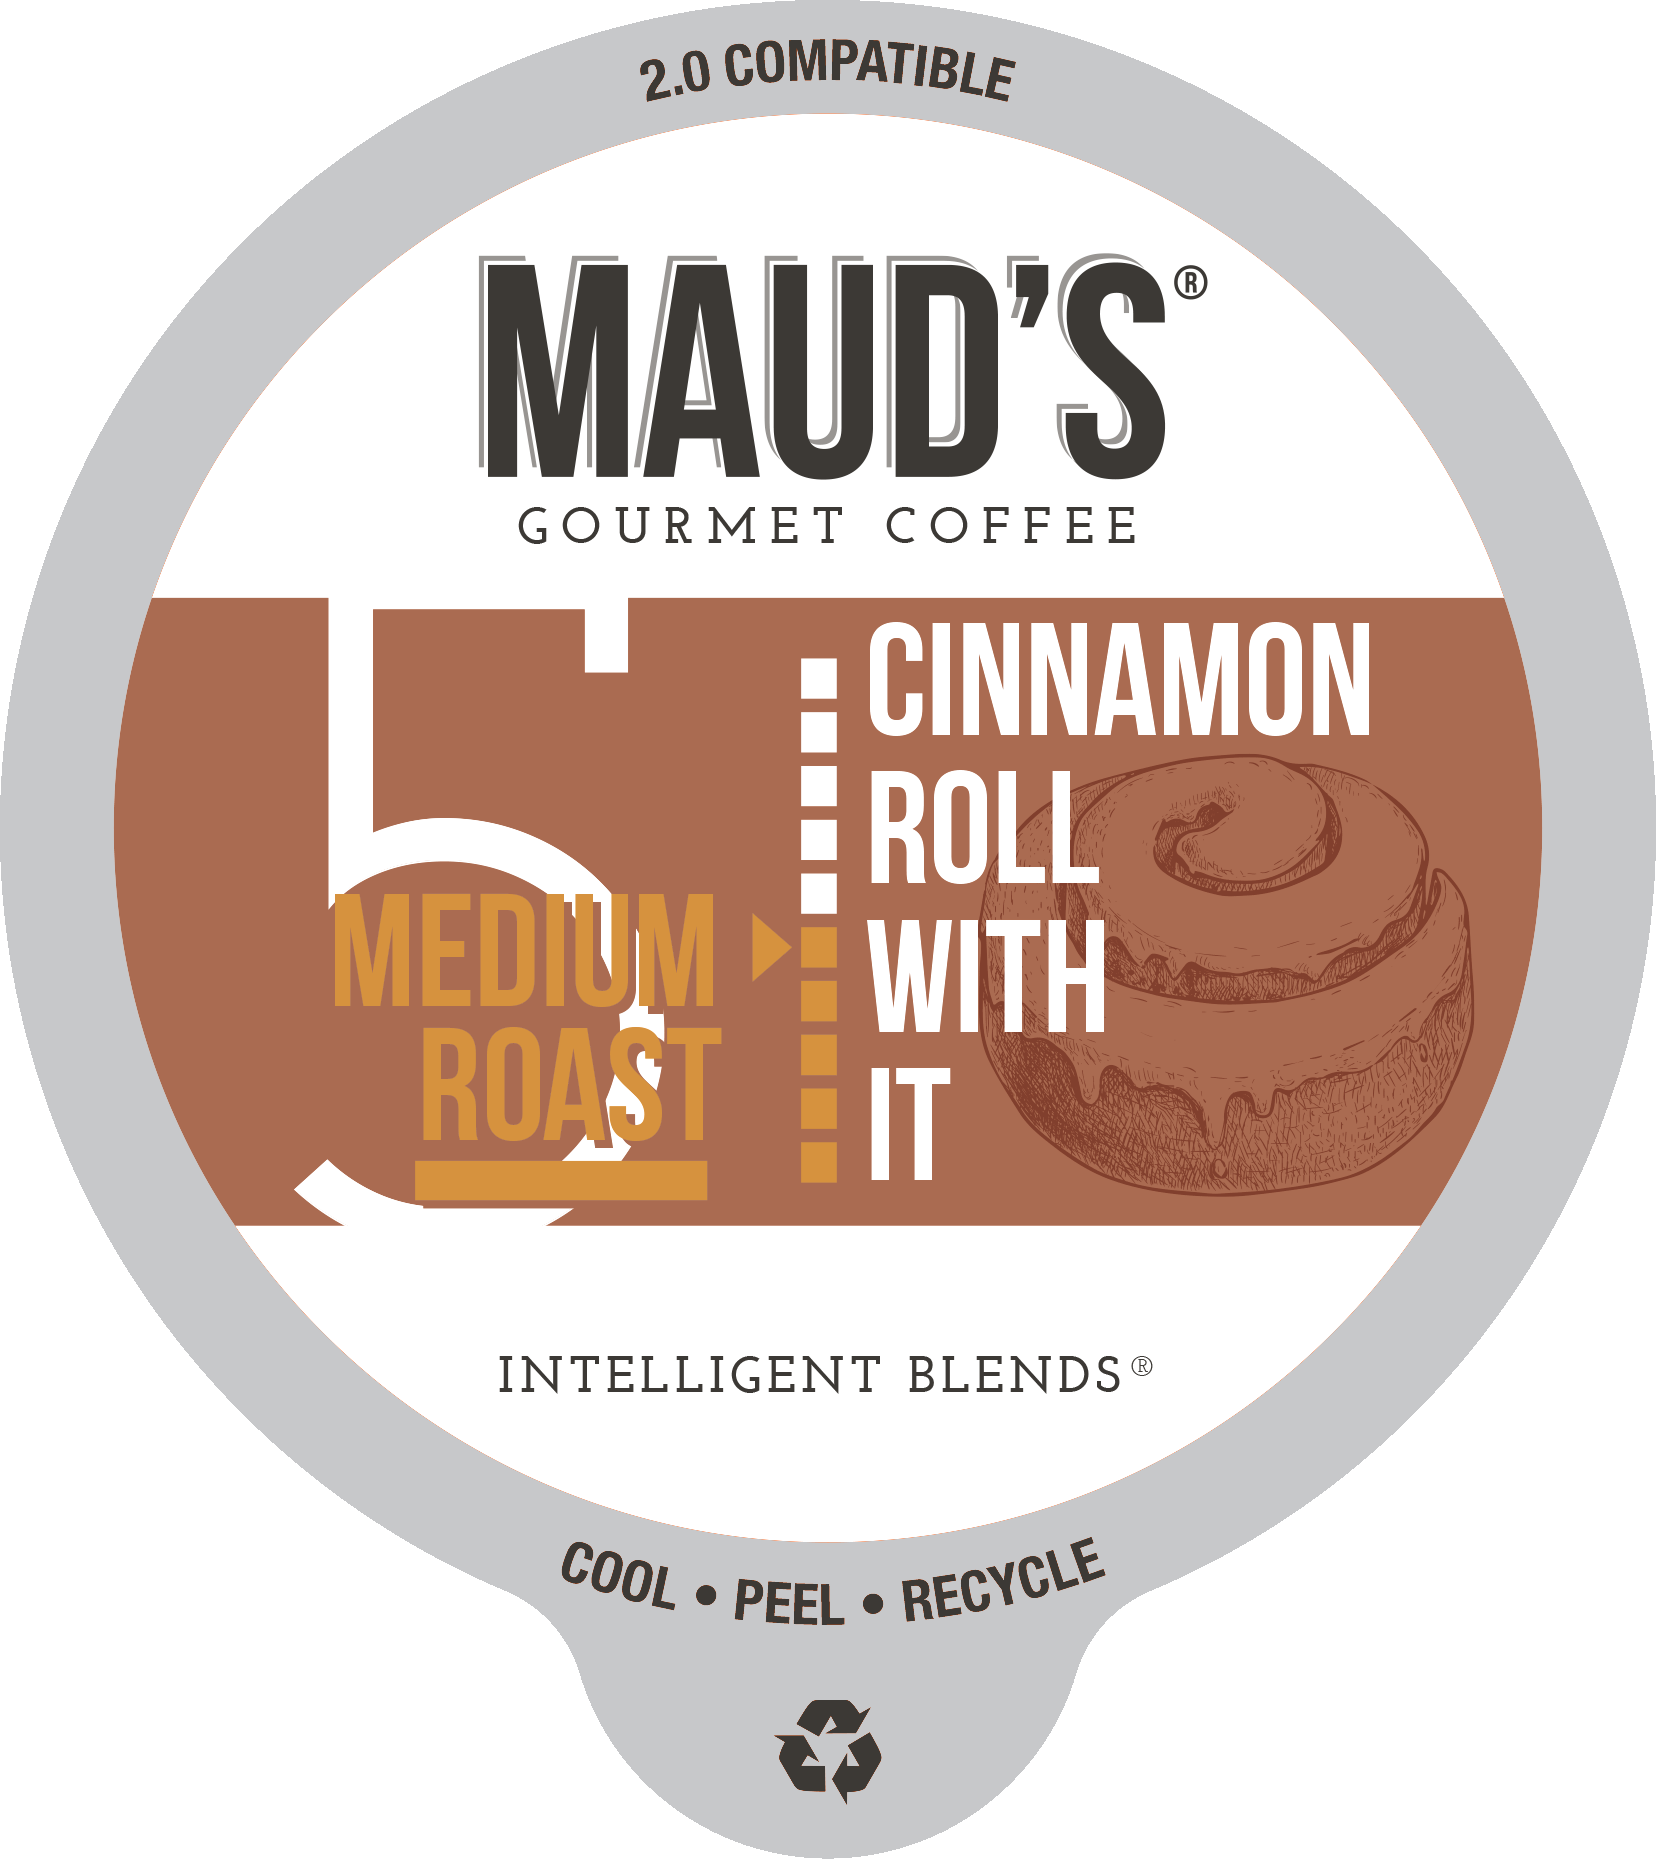 Maud's Cinnamon Roll Flavored Coffee Pods (Cinnamon Roll With It) - 18ct